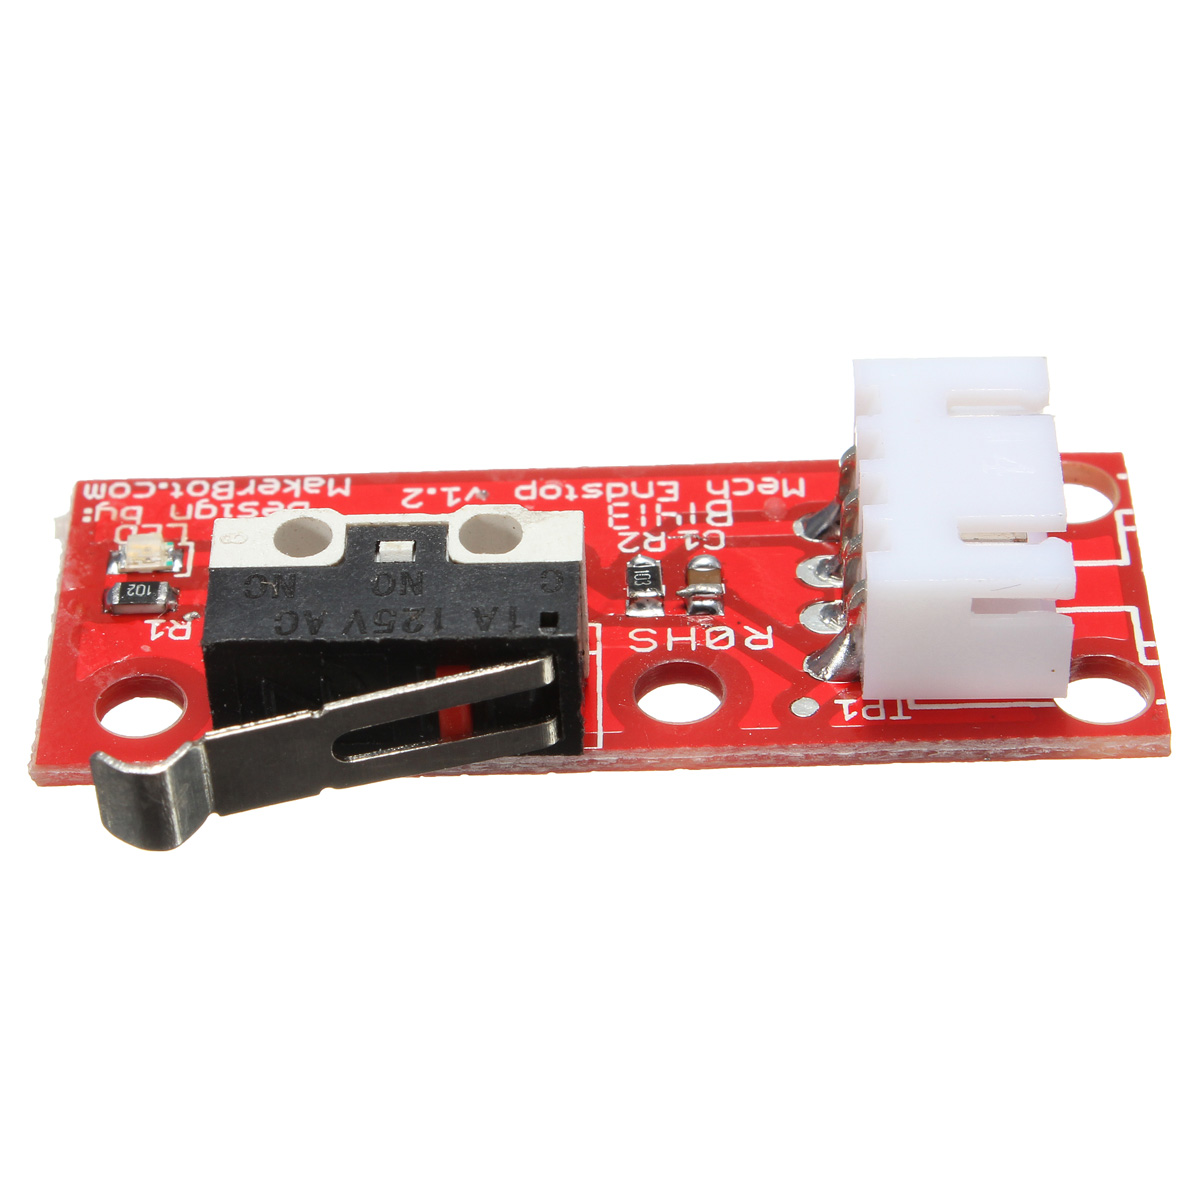 RAMPS 1.4 Endstop Switch For RepRap Mendel 3D Printer With 70cm Cable 8